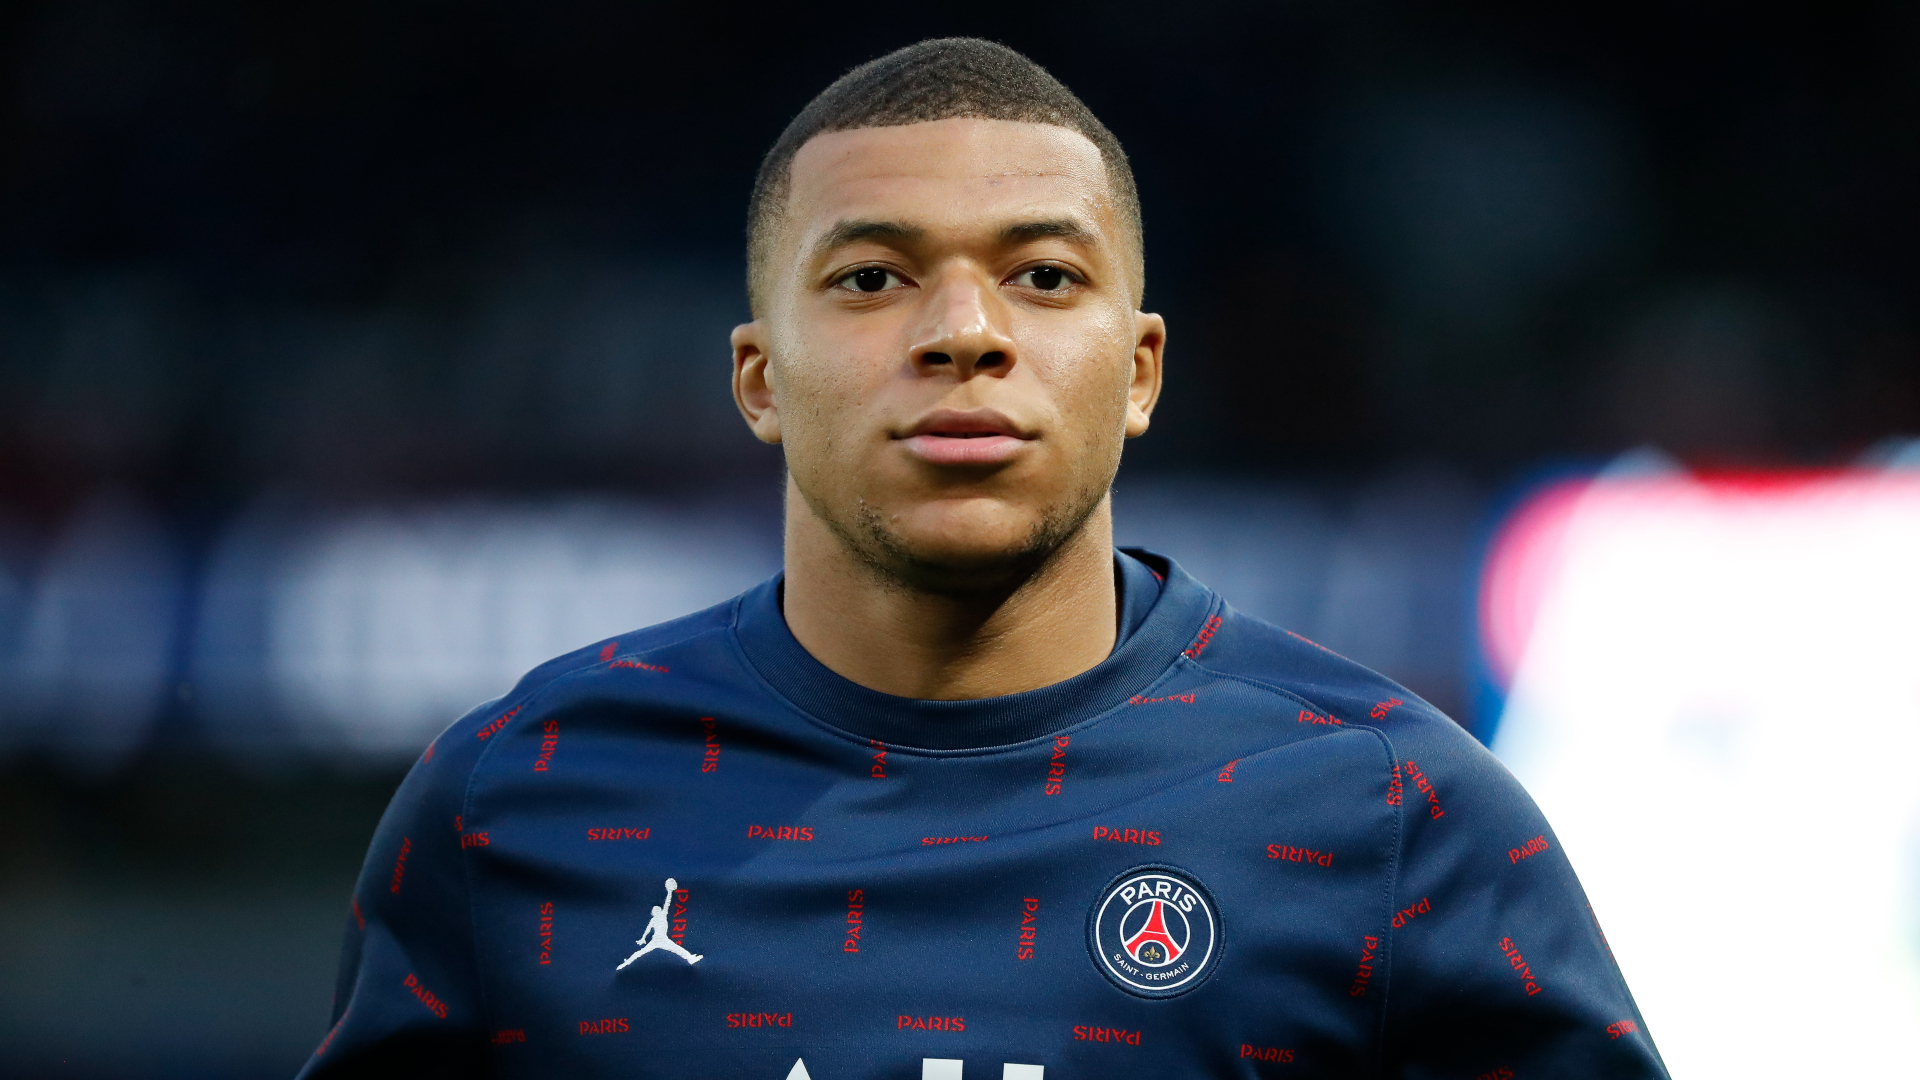 Top 10 Highest Paid Footballers In The World Kylian Mbappe - Top 10 Most Expensive Transfers in Football History